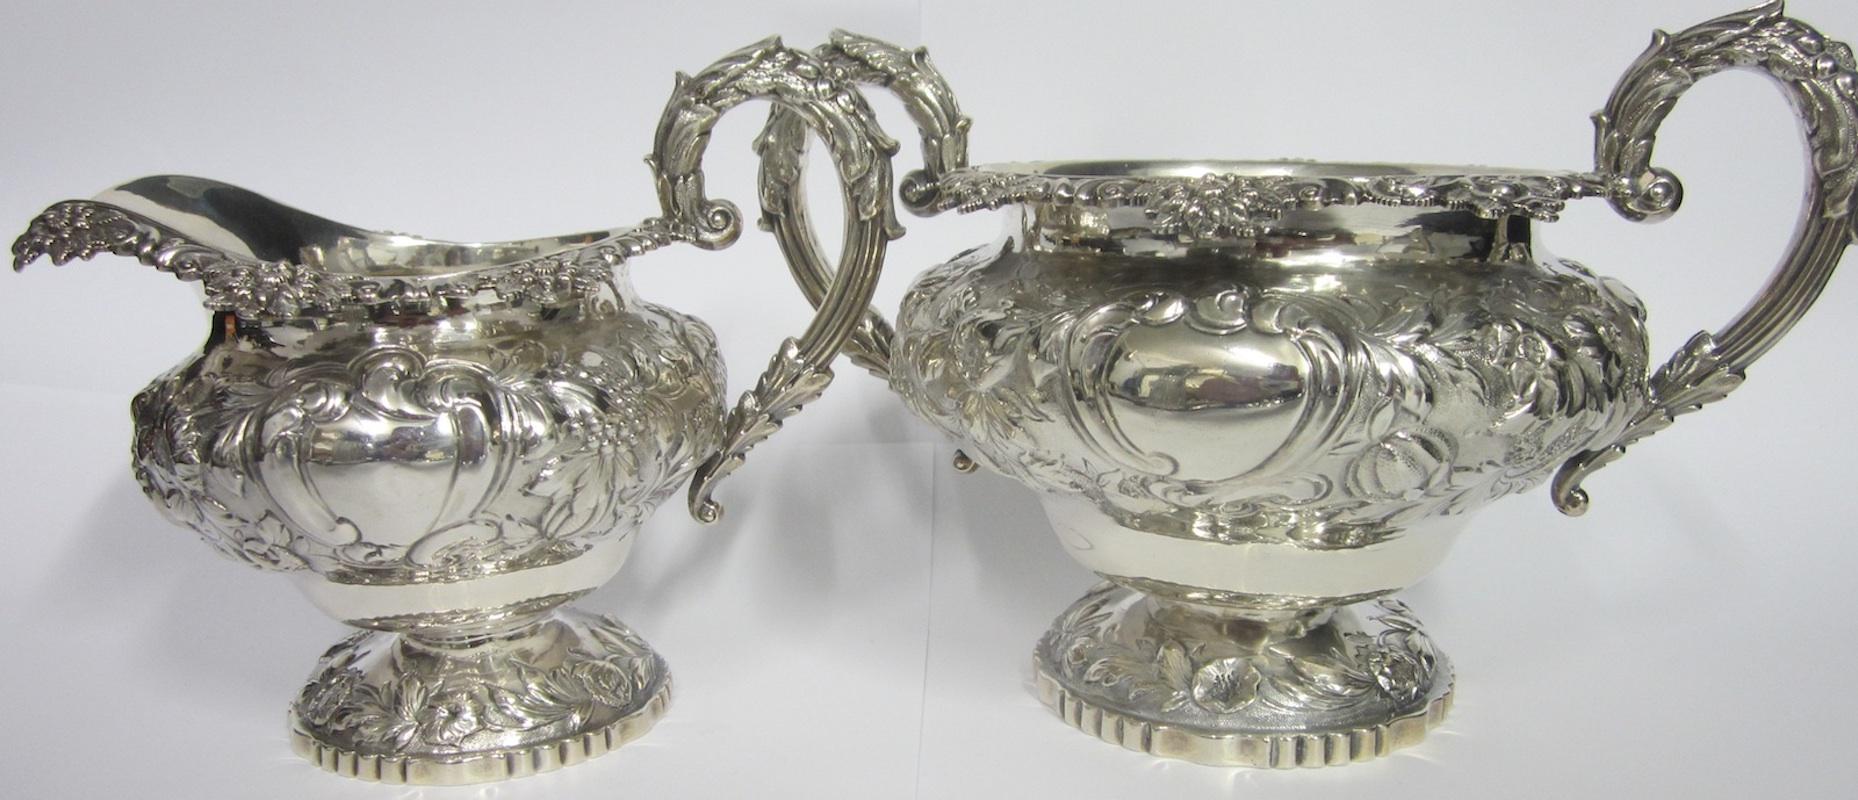 Early 19th Century George IV Sterling Silver Sugar Bowl and Cream Jug